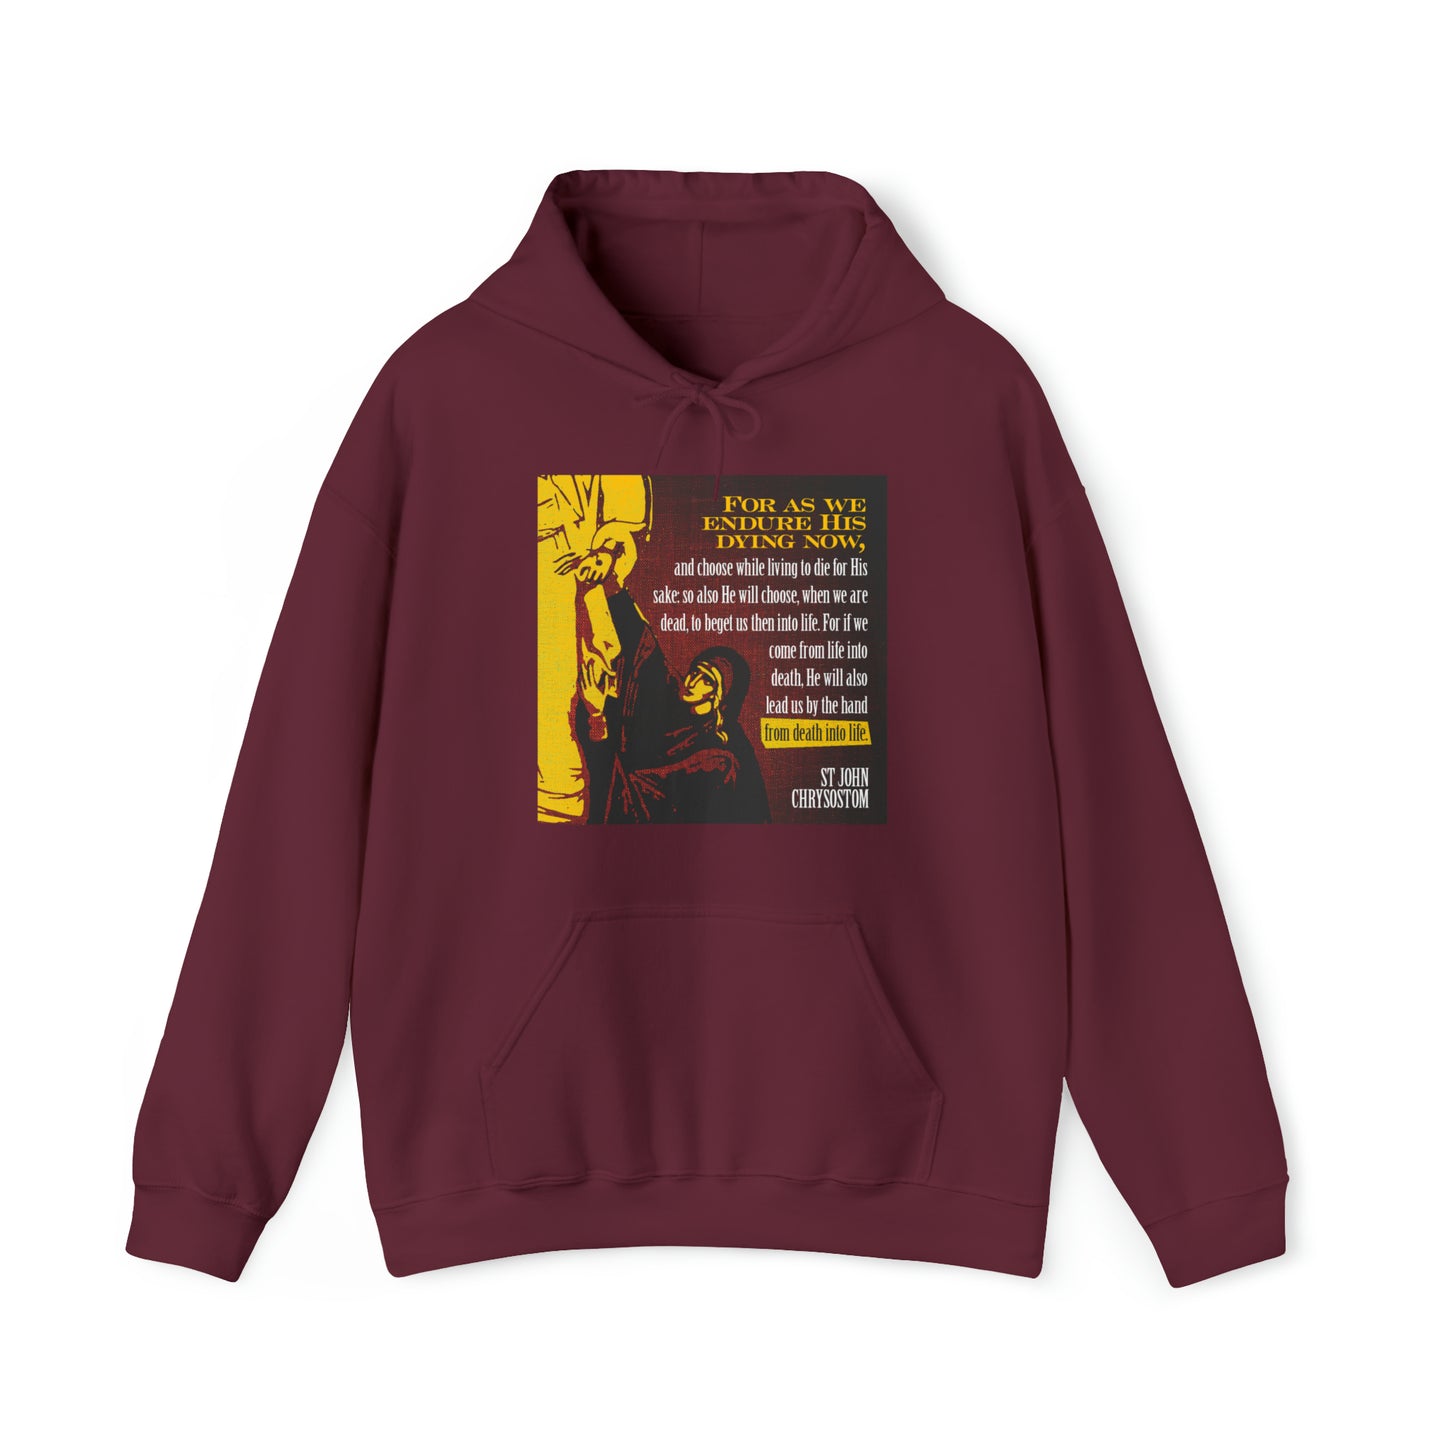 He Will Lead Us by the Hand from Death Into Life No. 1 | Orthodox Christian Hoodie / Hooded Sweatshirt